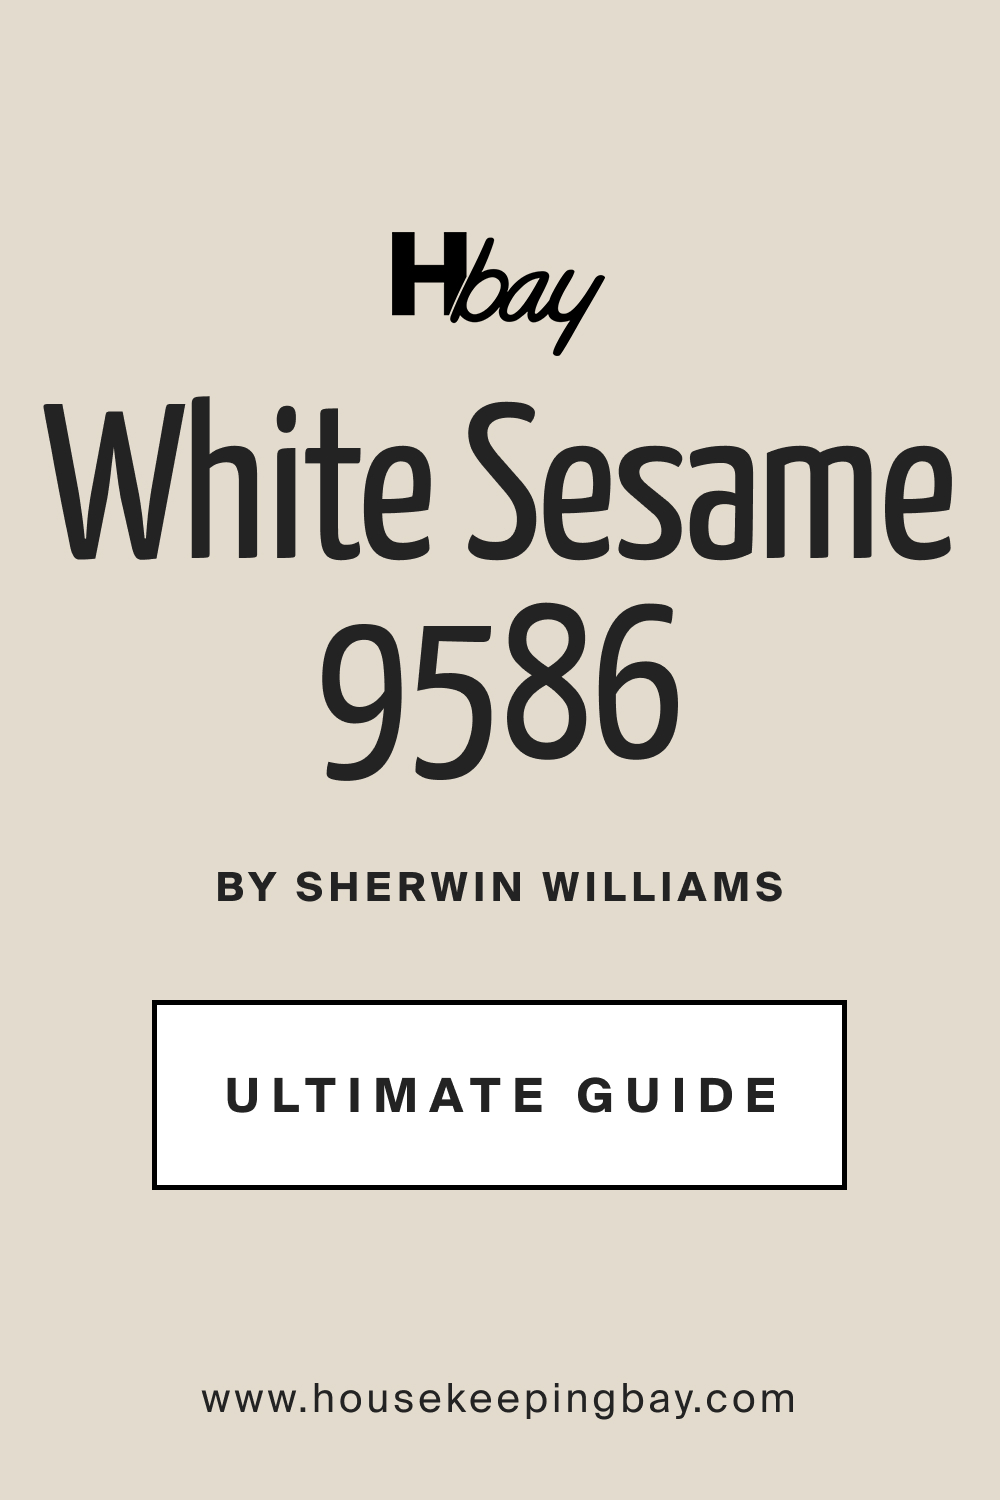 SW 9586 White Sesame by Sherwin Williams Ultimate Guide